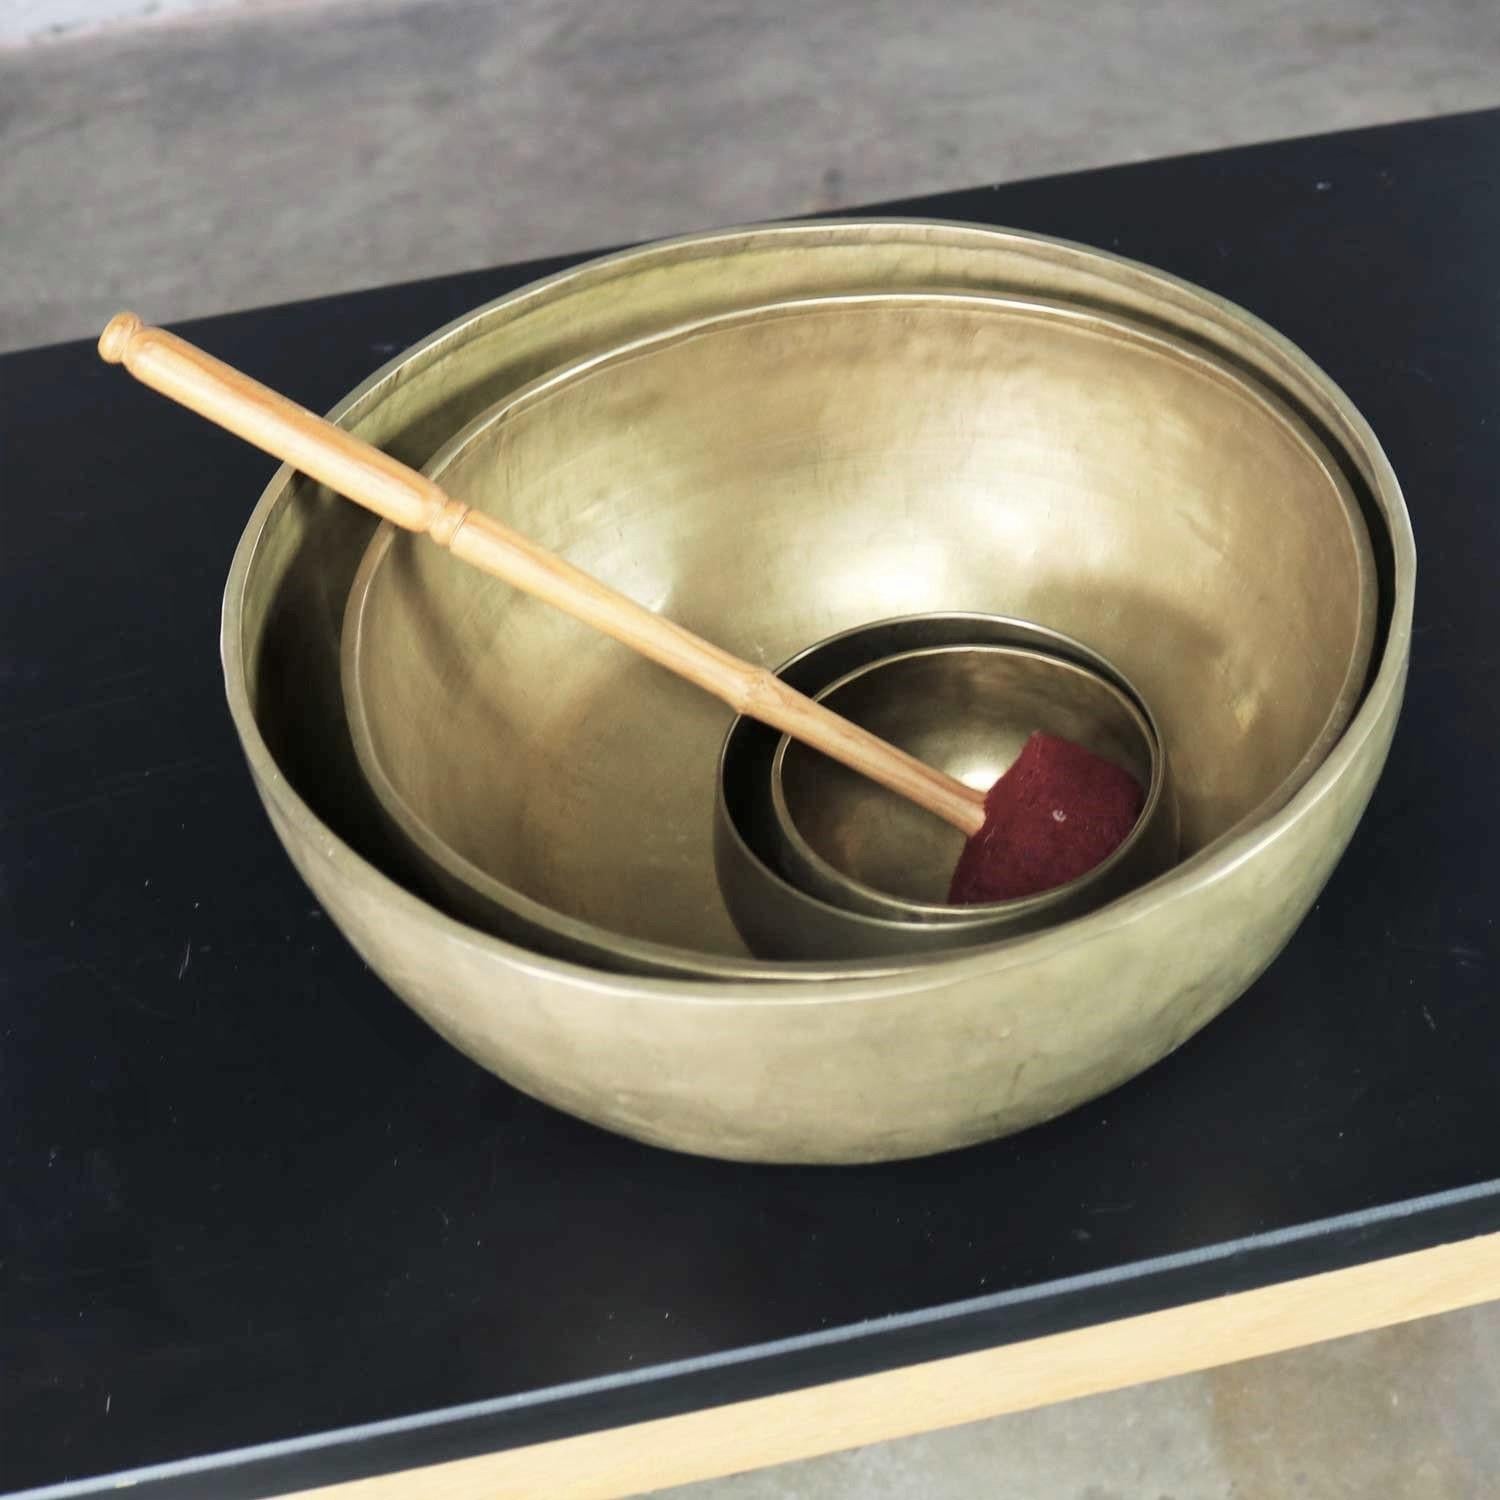 Handsome set of 4 nesting singing bowls or standing bowls with 1 mallet for playing. Handmade of bronze or bell metal with no design. They are in wonderful vintage condition and have awesome patina. You can see the maker’s hand. Please see photos,